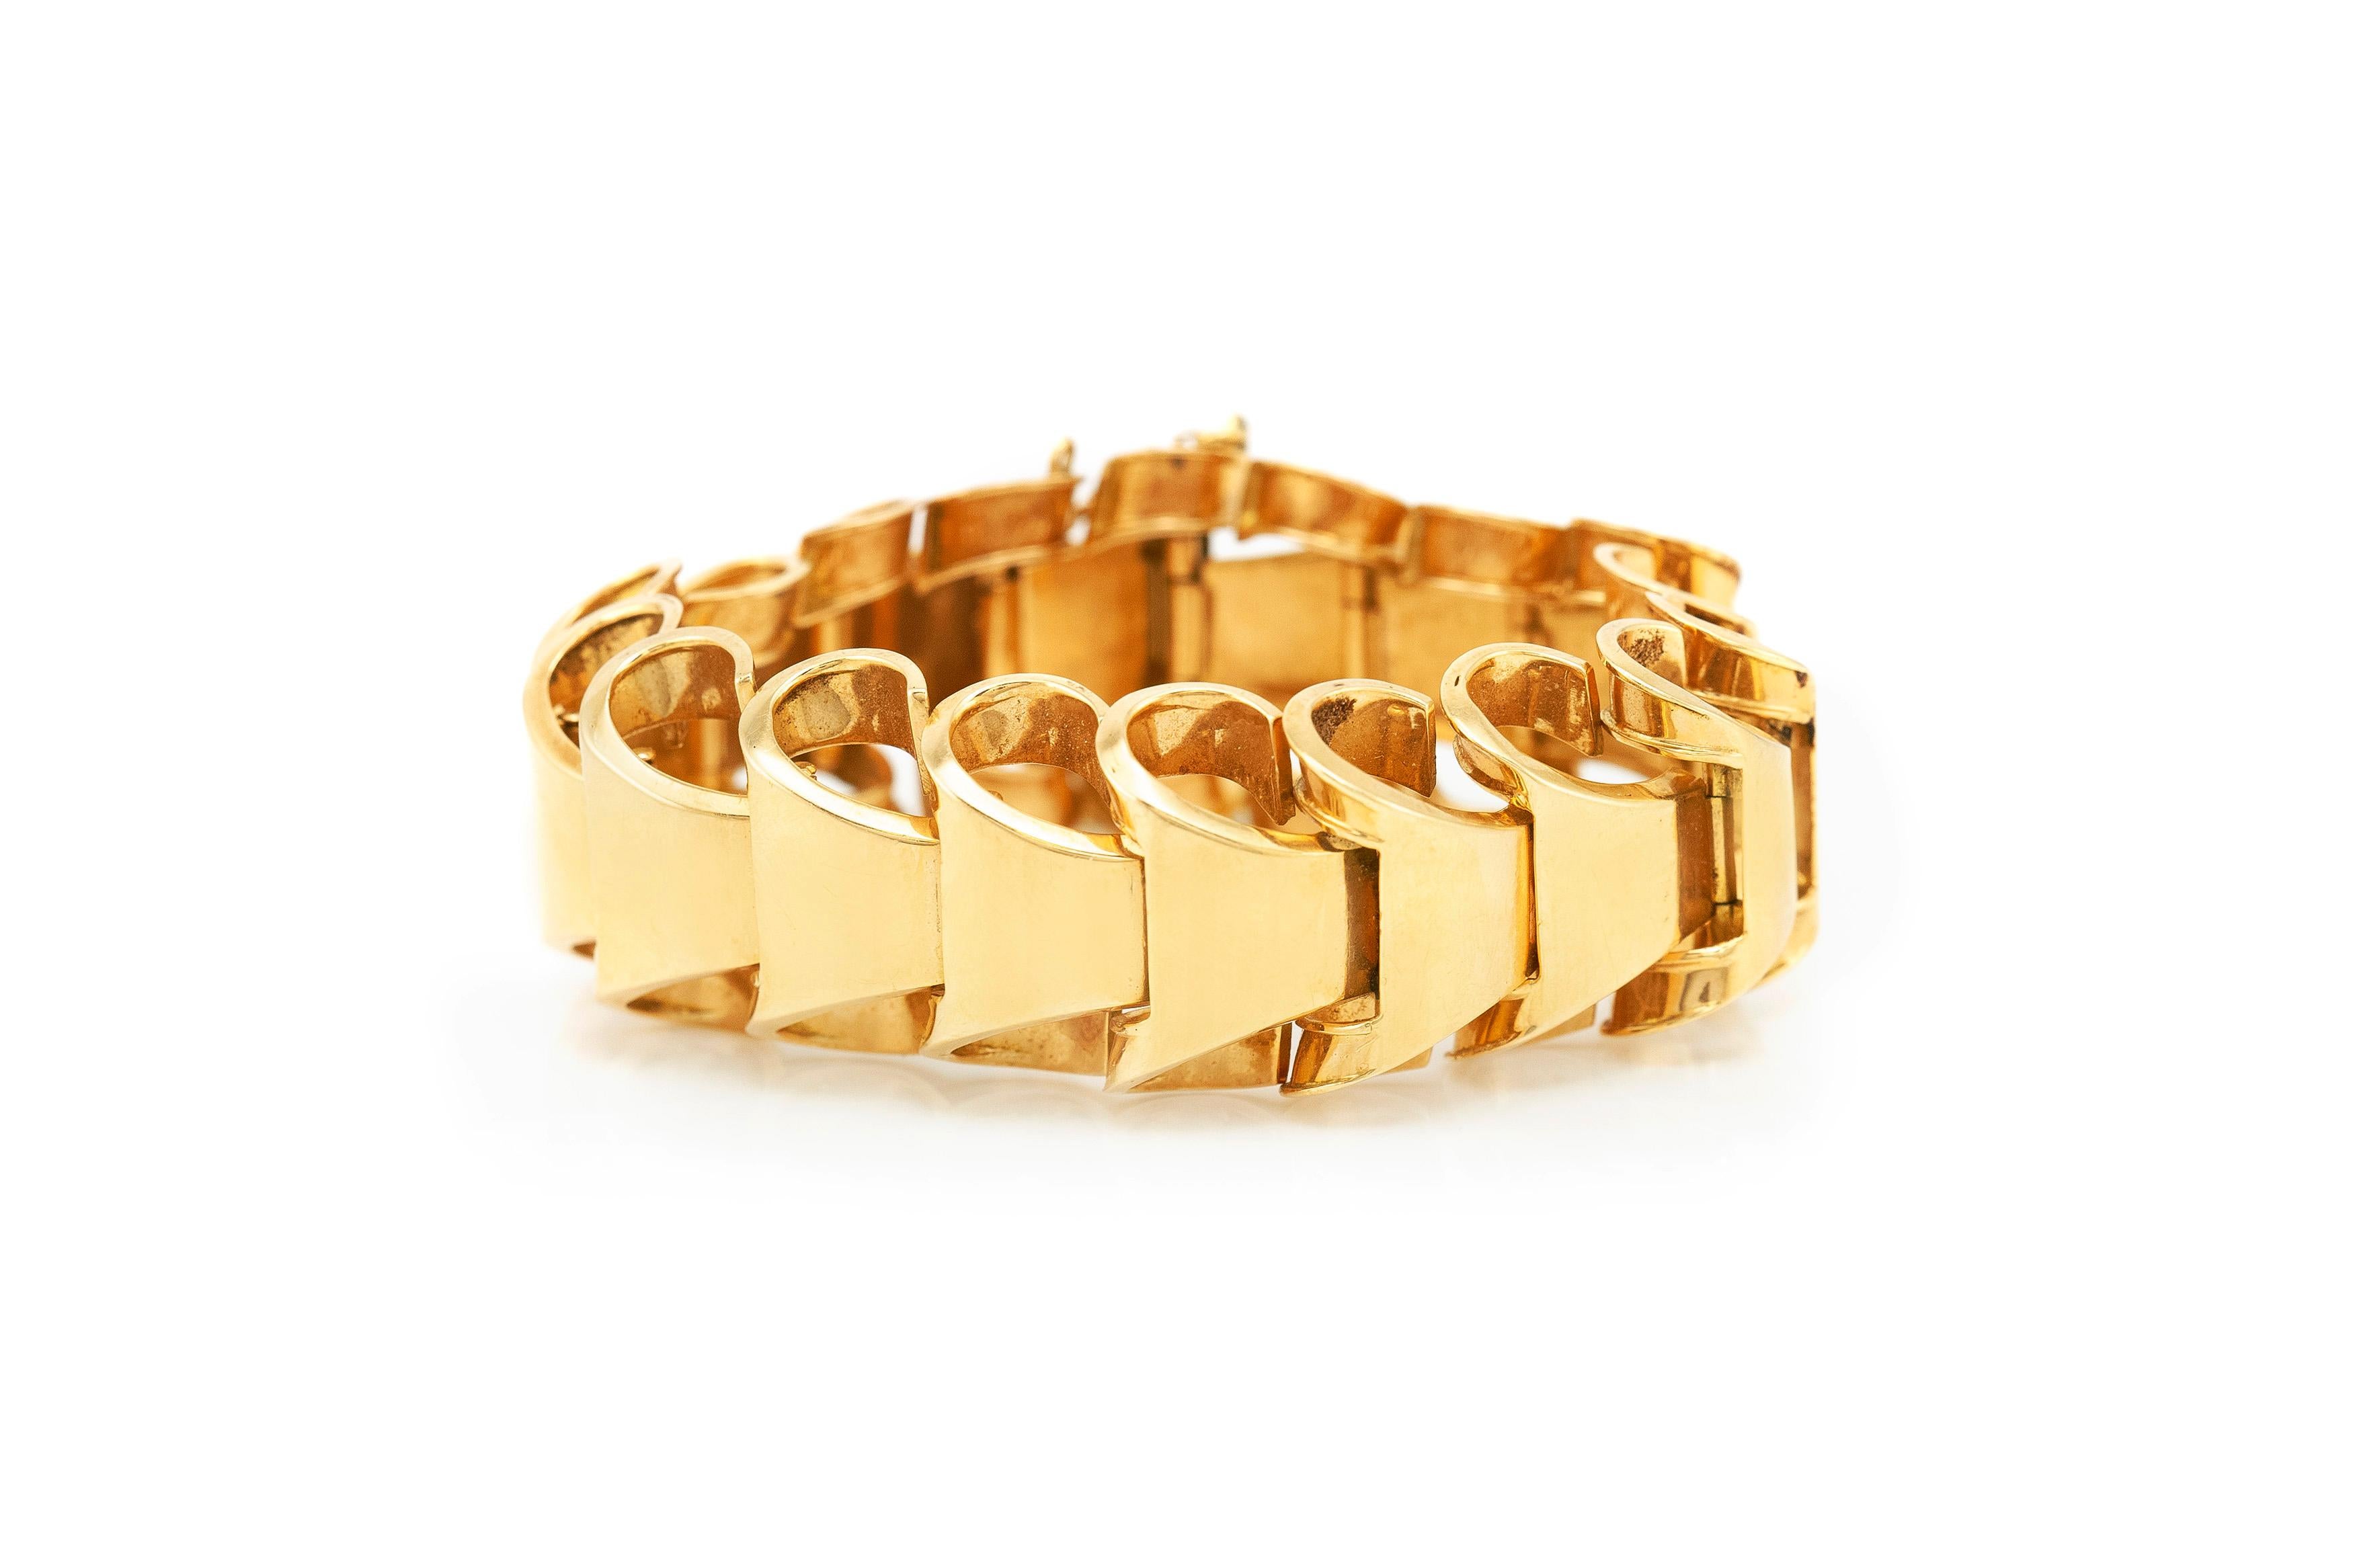 The bracelet is finely crafted in 18 k yellow gold.
Very trendy and not heavy beautiful bracelet.
